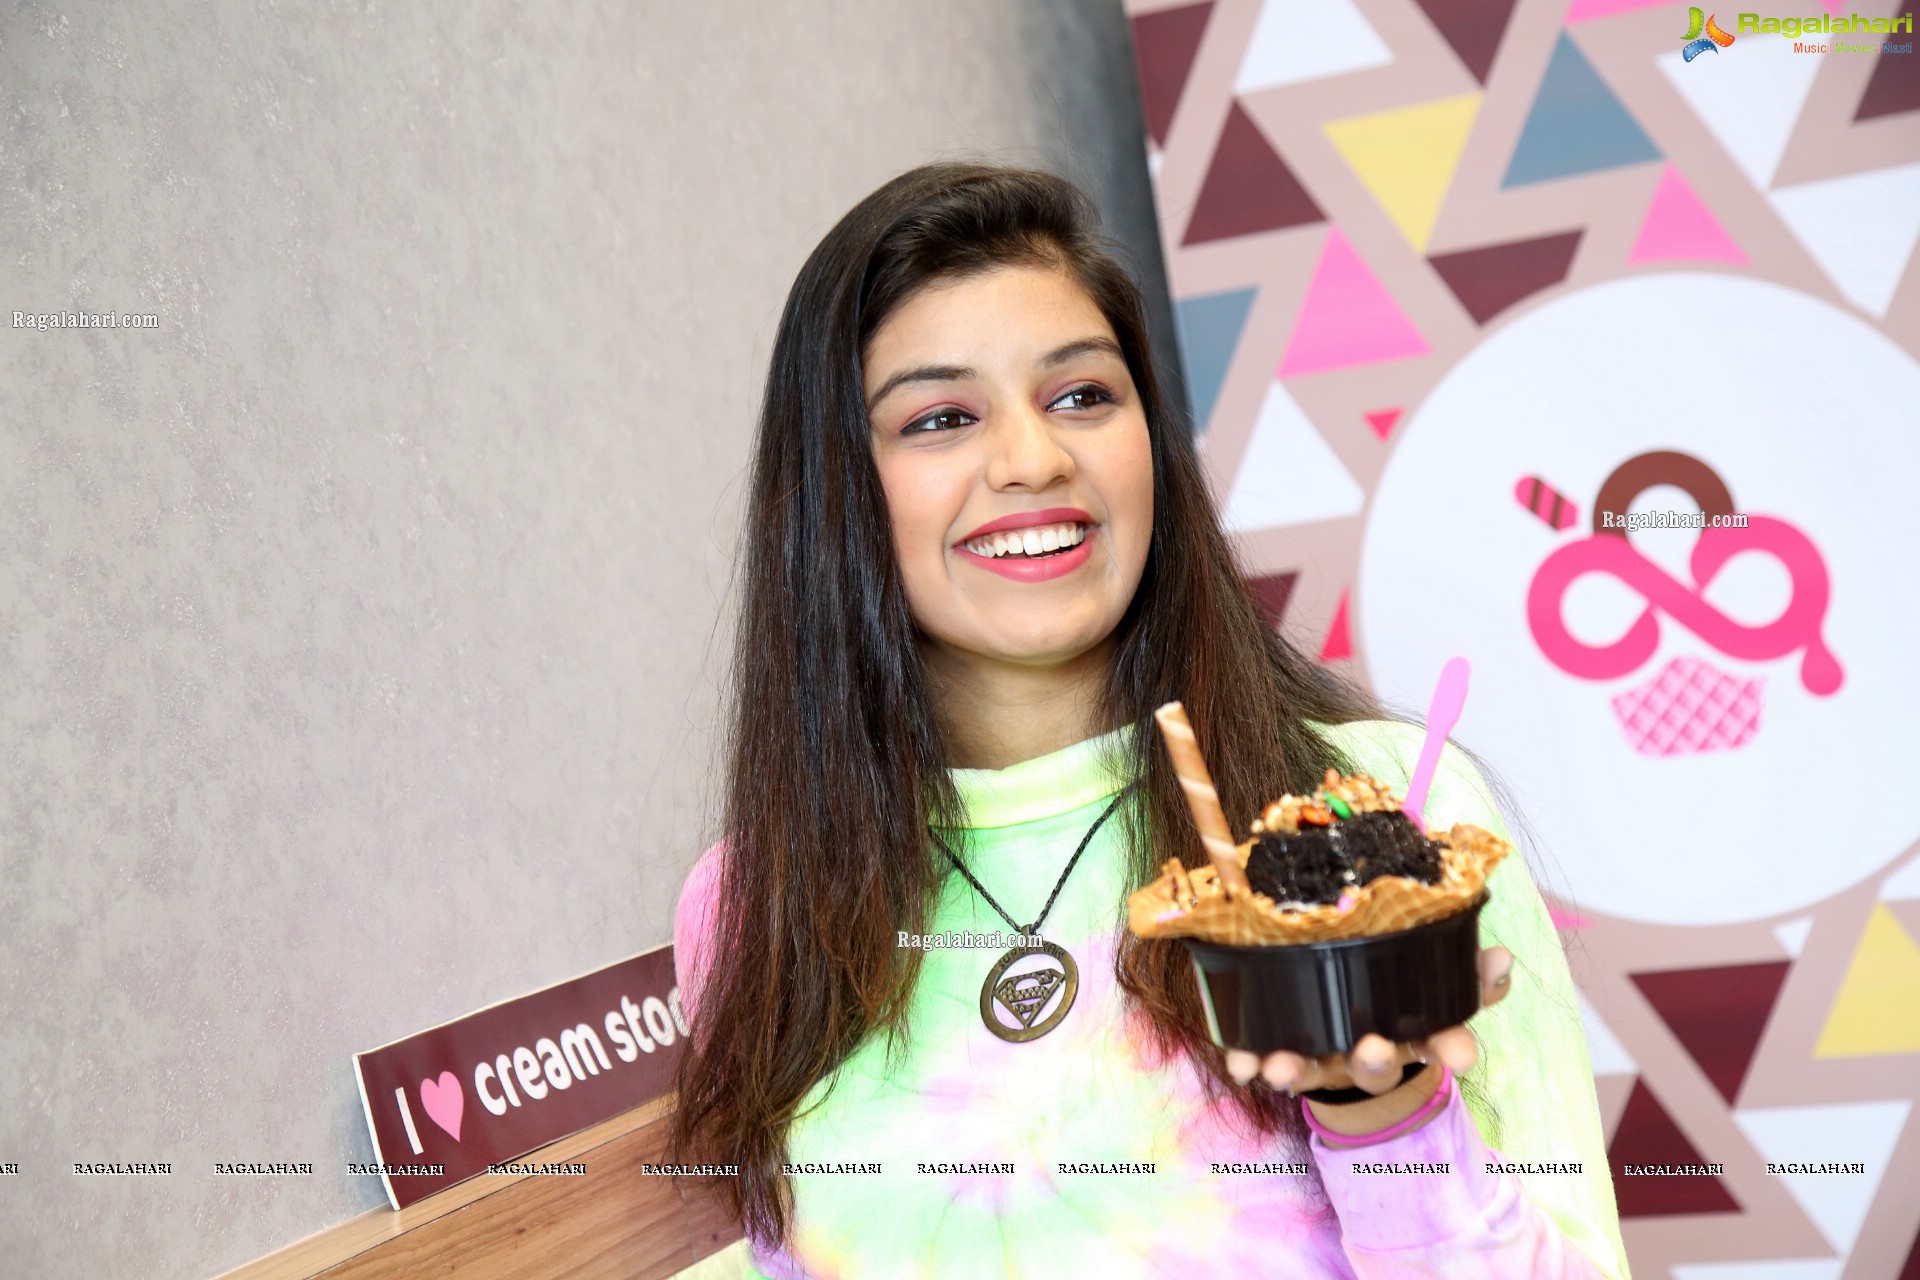 Shruthi Sharma Poses With an Ice Cream, HD Photo Gallery